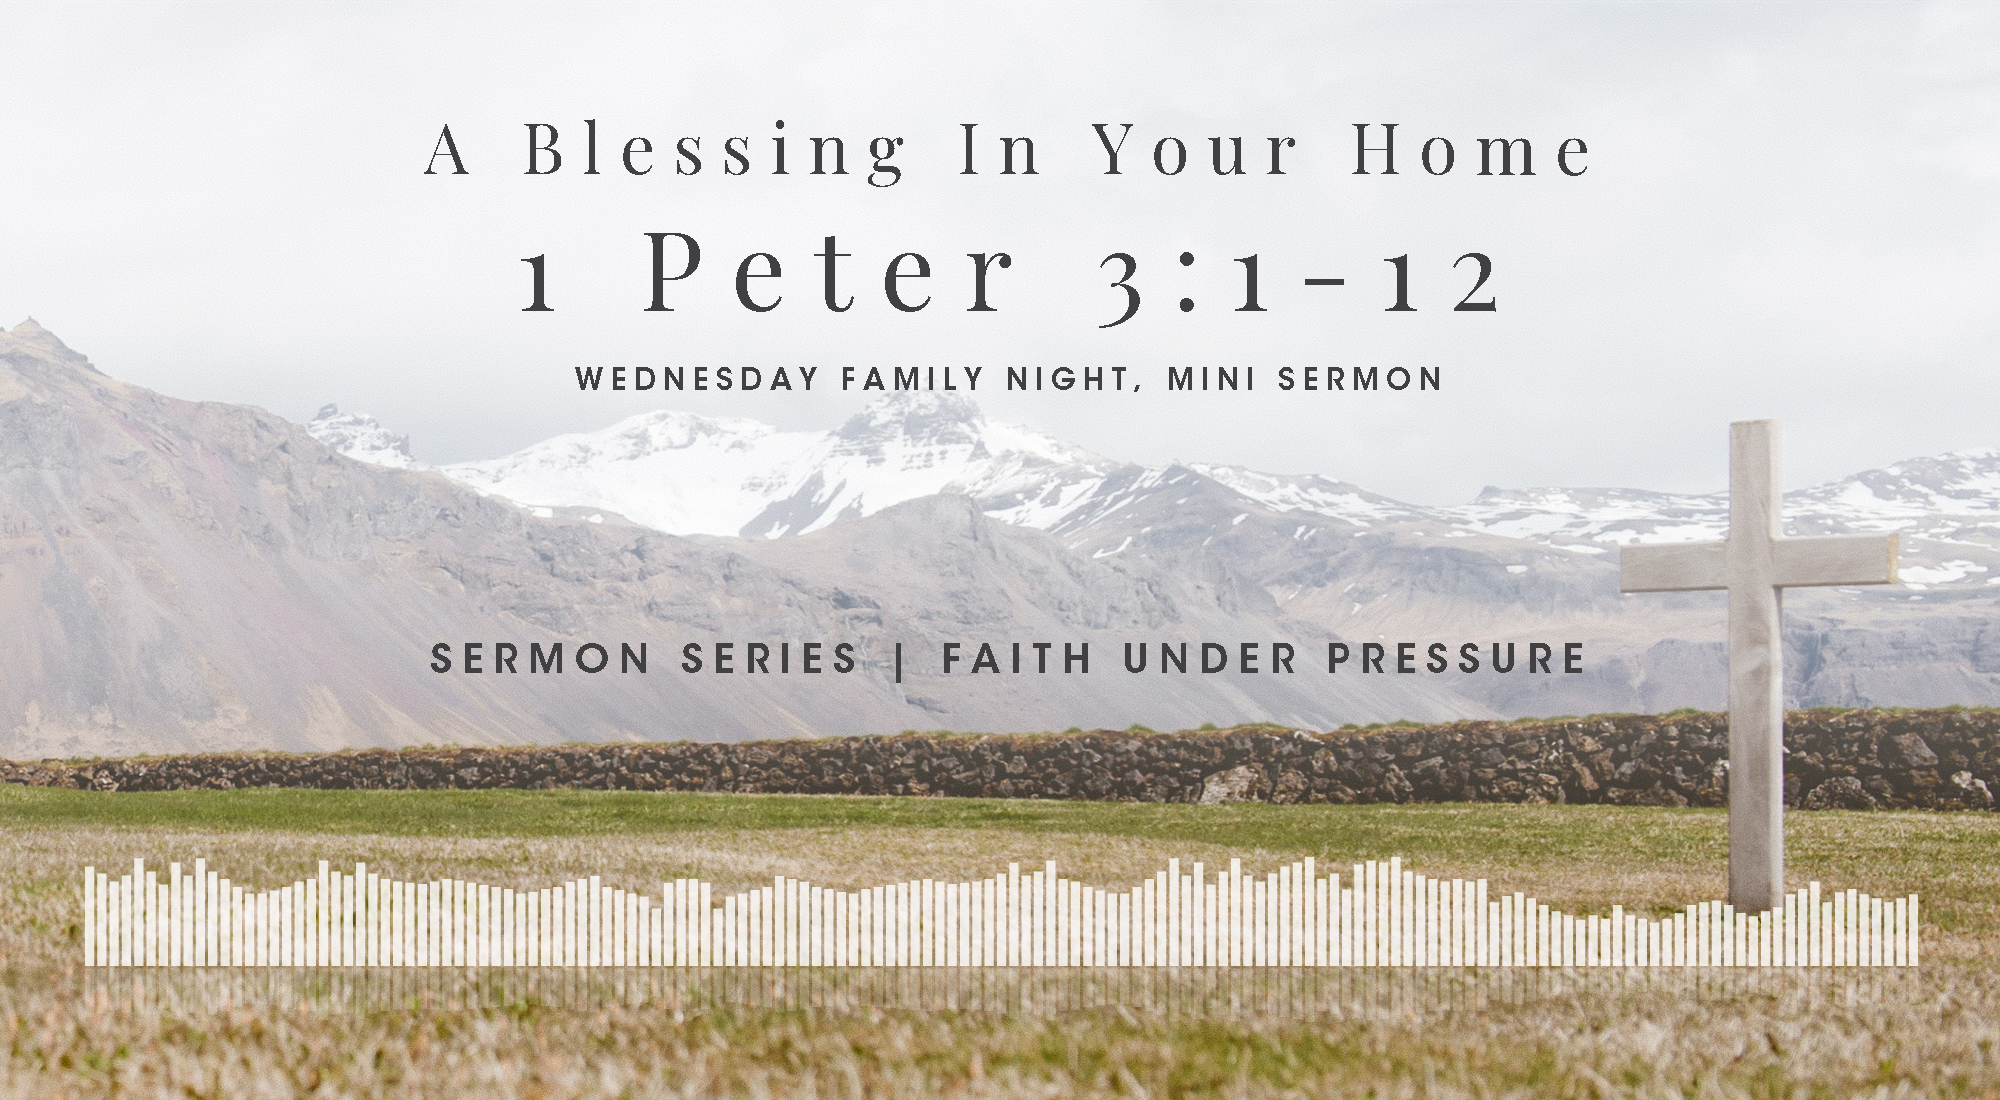 A Blessing in Your Home, A Mini Bible Study in 1 Peter 3:1-12, From Our Faith Under Pressure Sermon Series, Wyandotte County Christian Church Wednesday Family Night